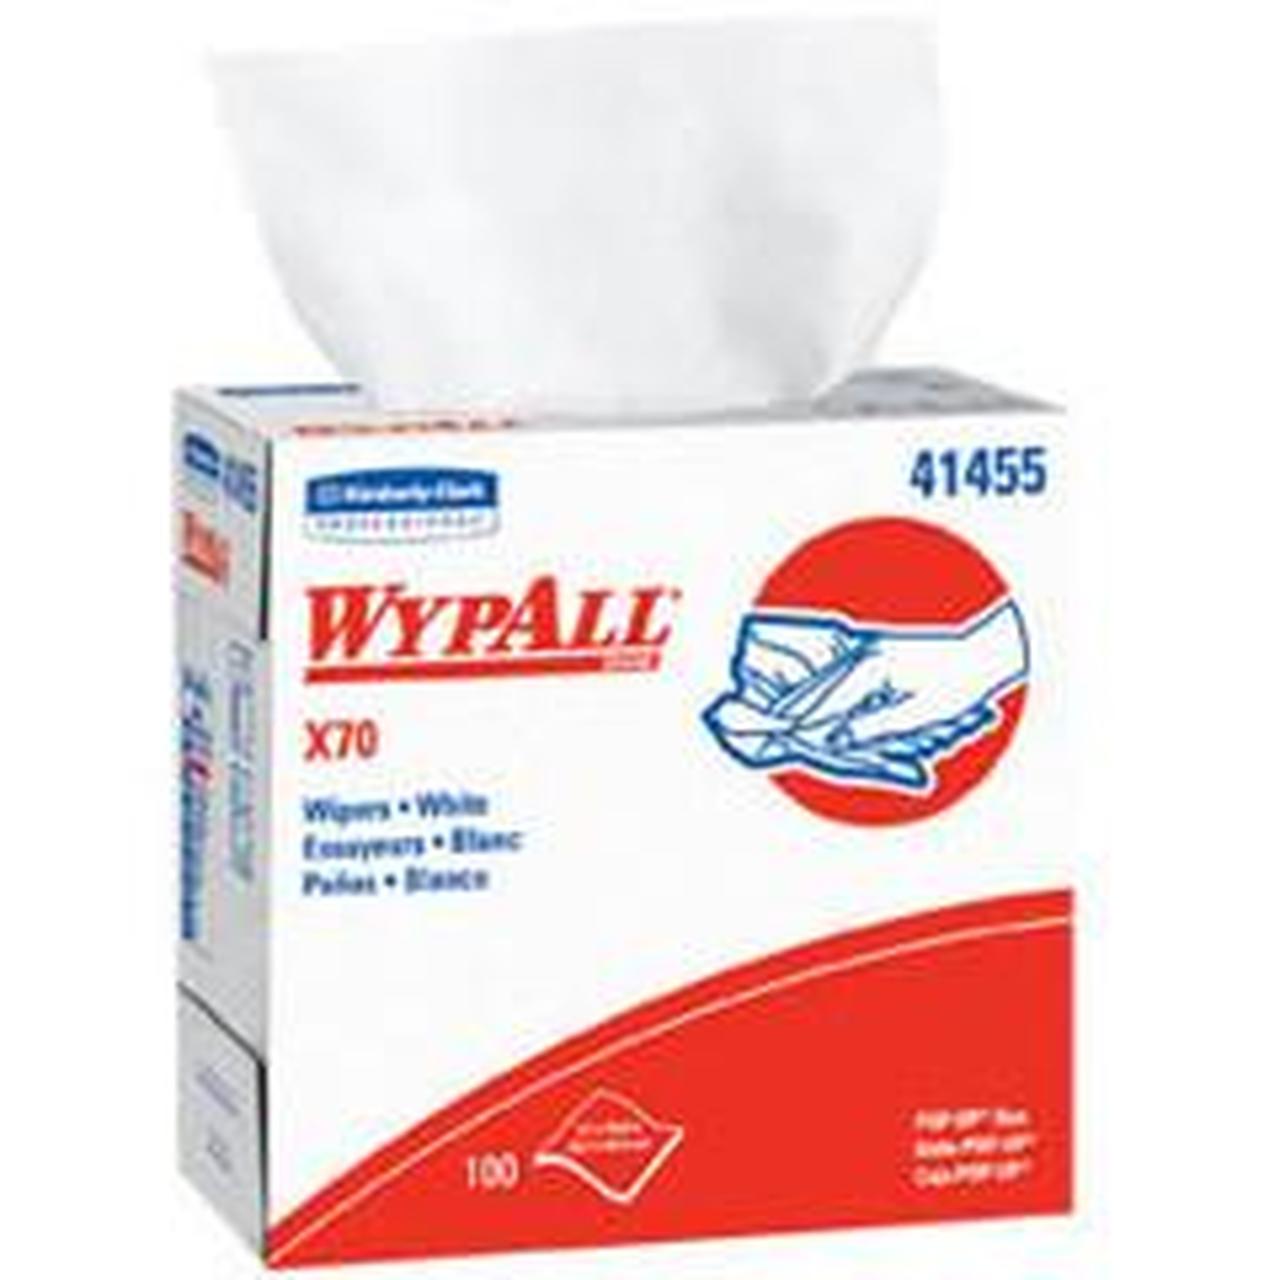 Kimberly Clark WypAll X70 Workhorse Reinforced Wipes | White 9" x 16.8" | KC 41455 | Package of 100 wipes